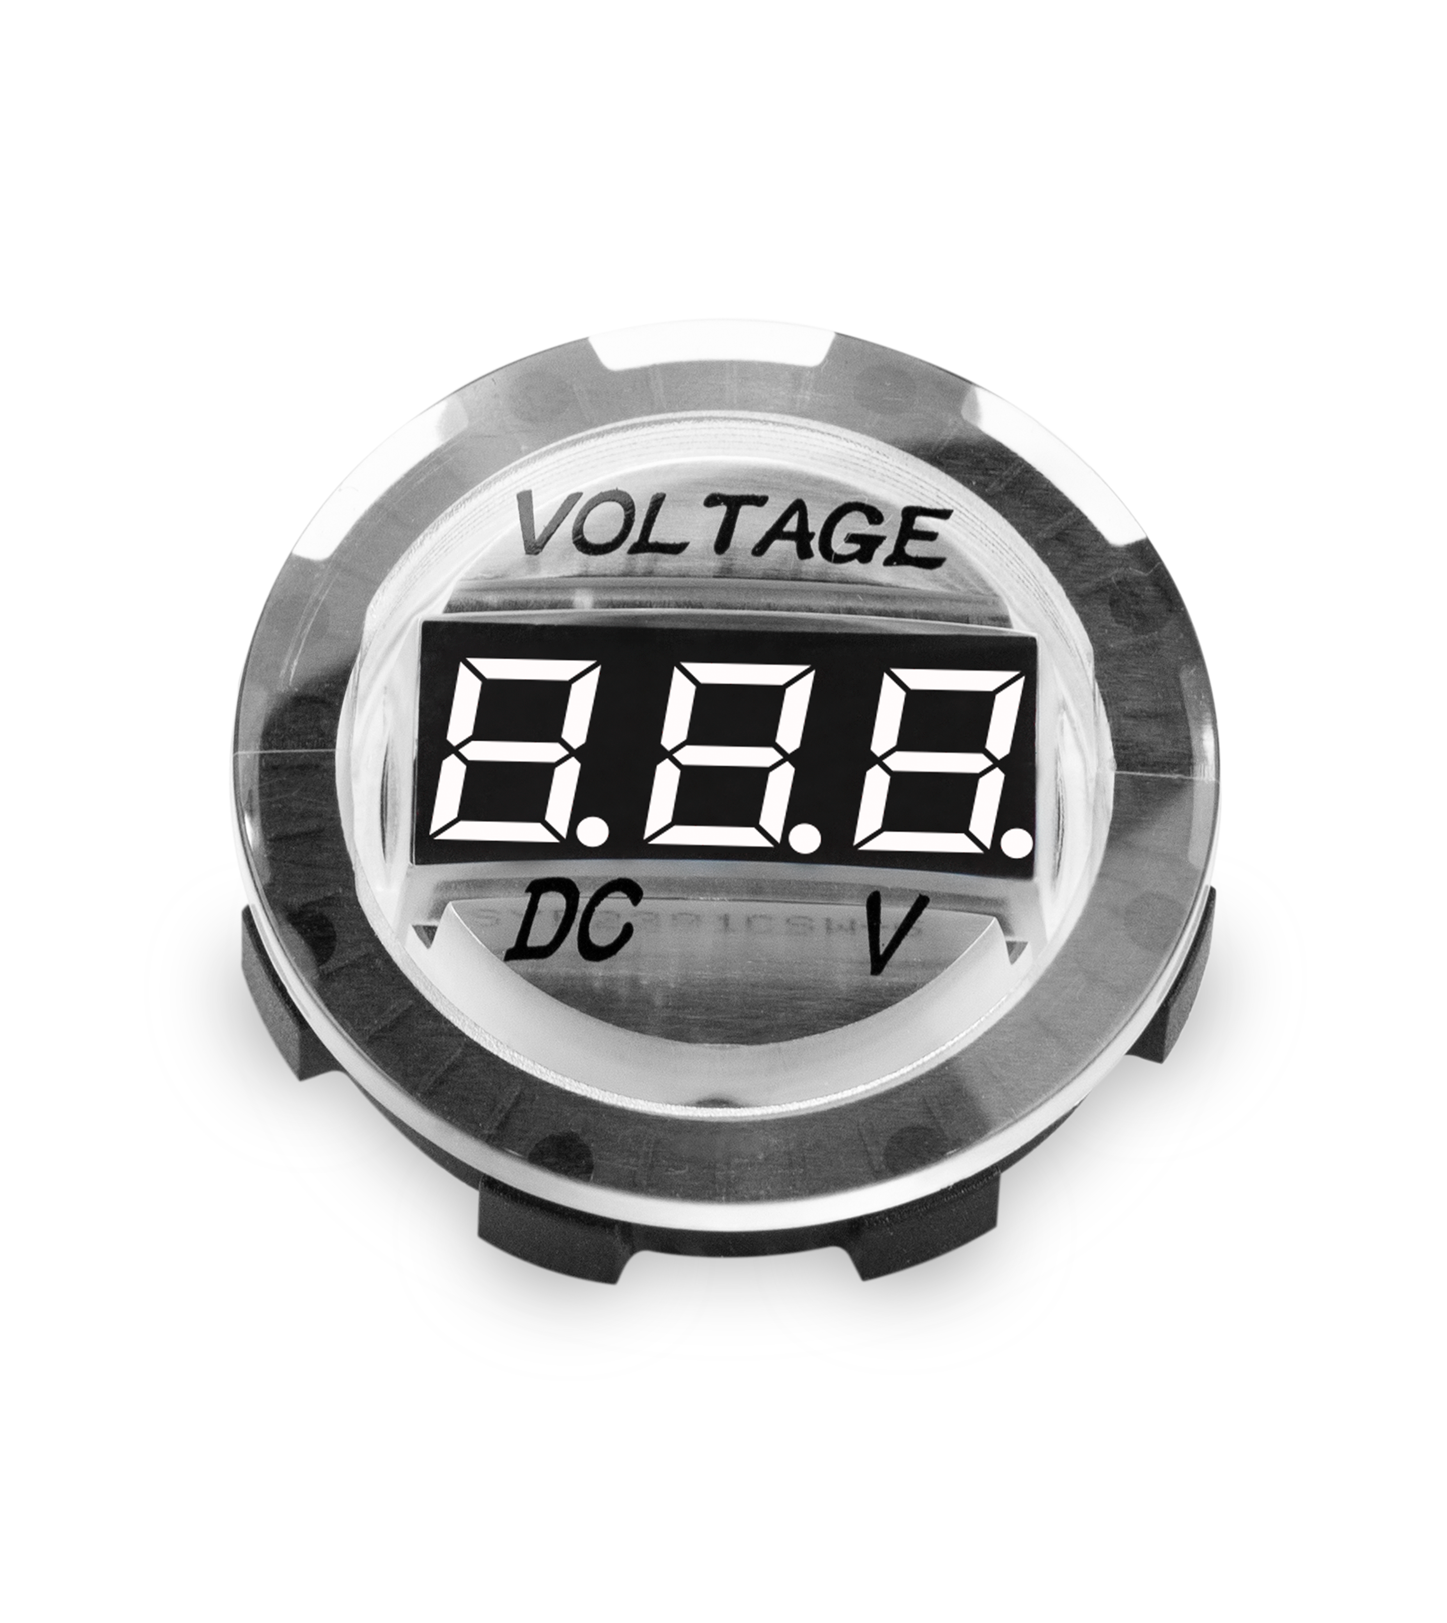 4 In 1 Motorcycle ATV Voltmeter+Electronic Clock+Thermometer+